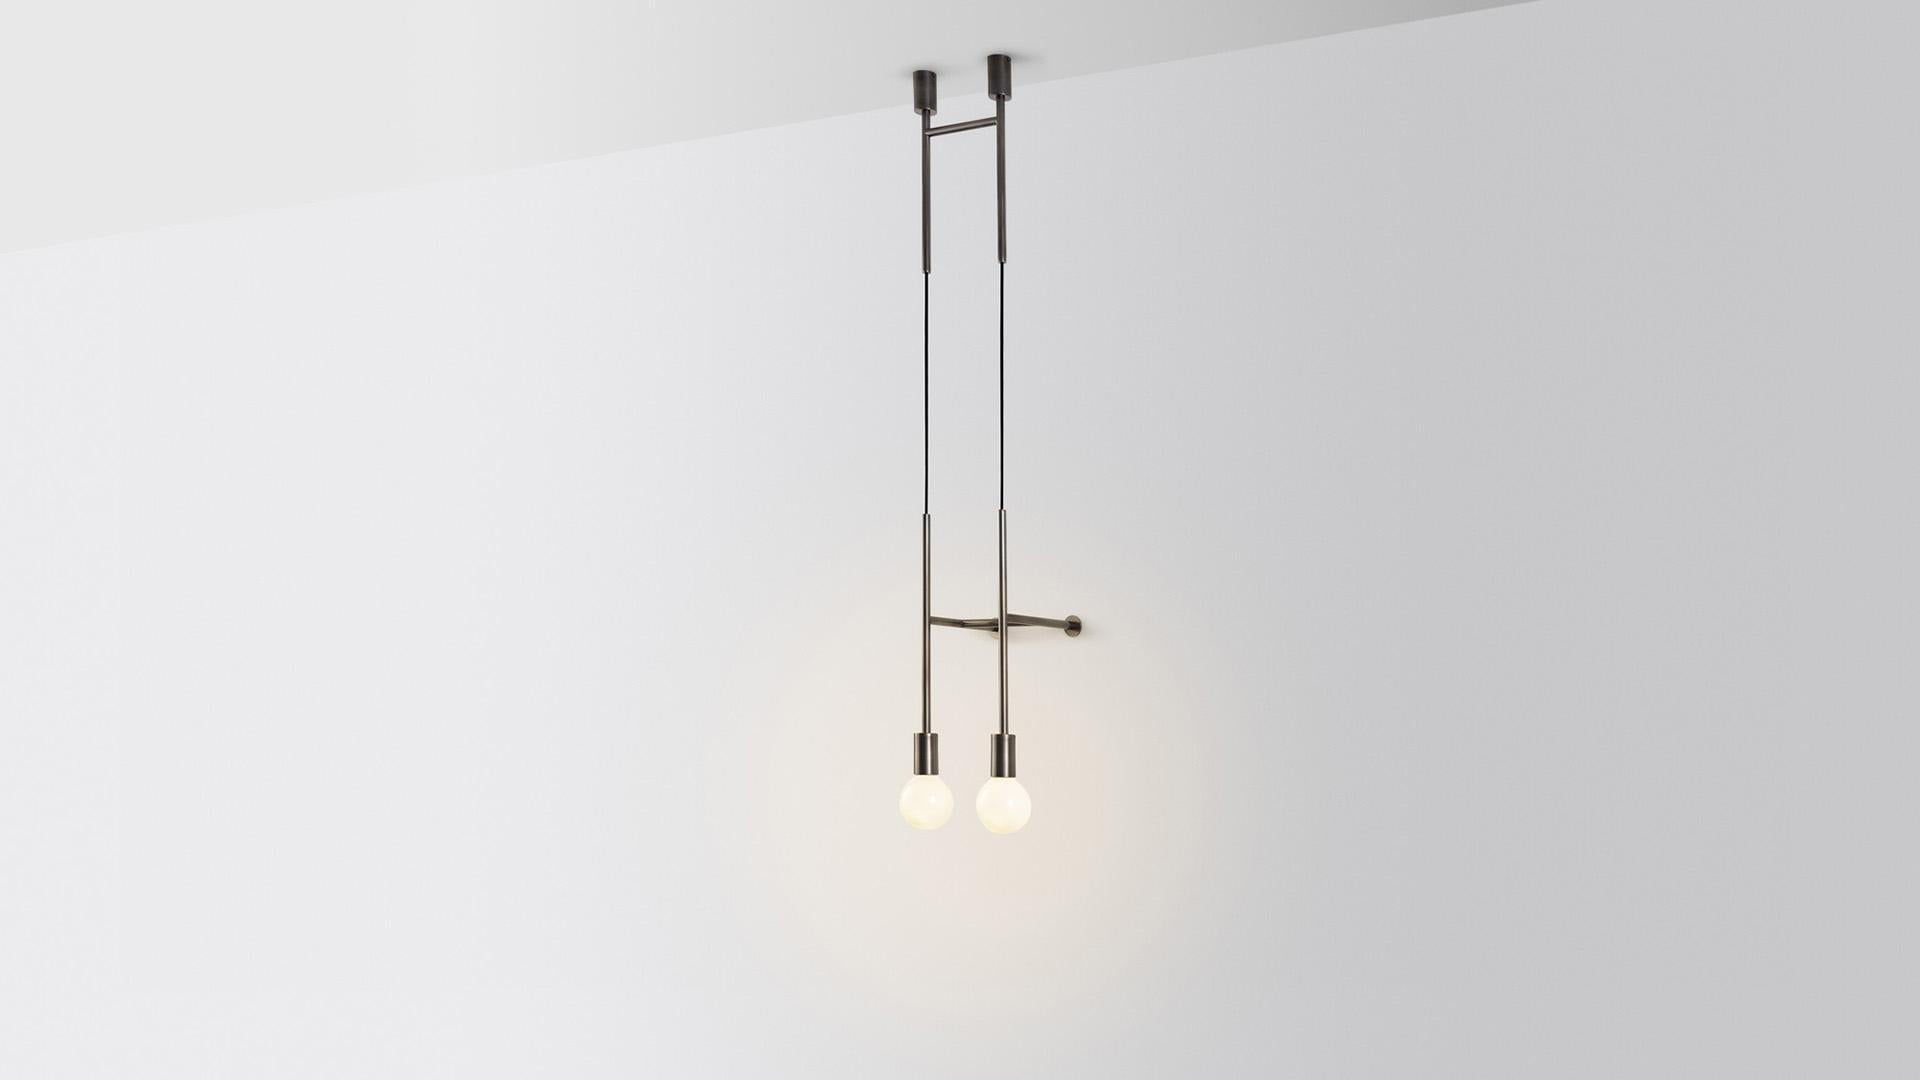 Double wall step light by Volker Haug.
Dimensions: D 24.8 x W 29.5 x H 108 cm. 
Material: Brass. 
Finish: Polished, Aged, Brushed, Bronzed, Blackened, or Plated
Cord: Fabric or metal
Lamp: Opal G95 LED (E26/E27 110 - 240V, 12V version